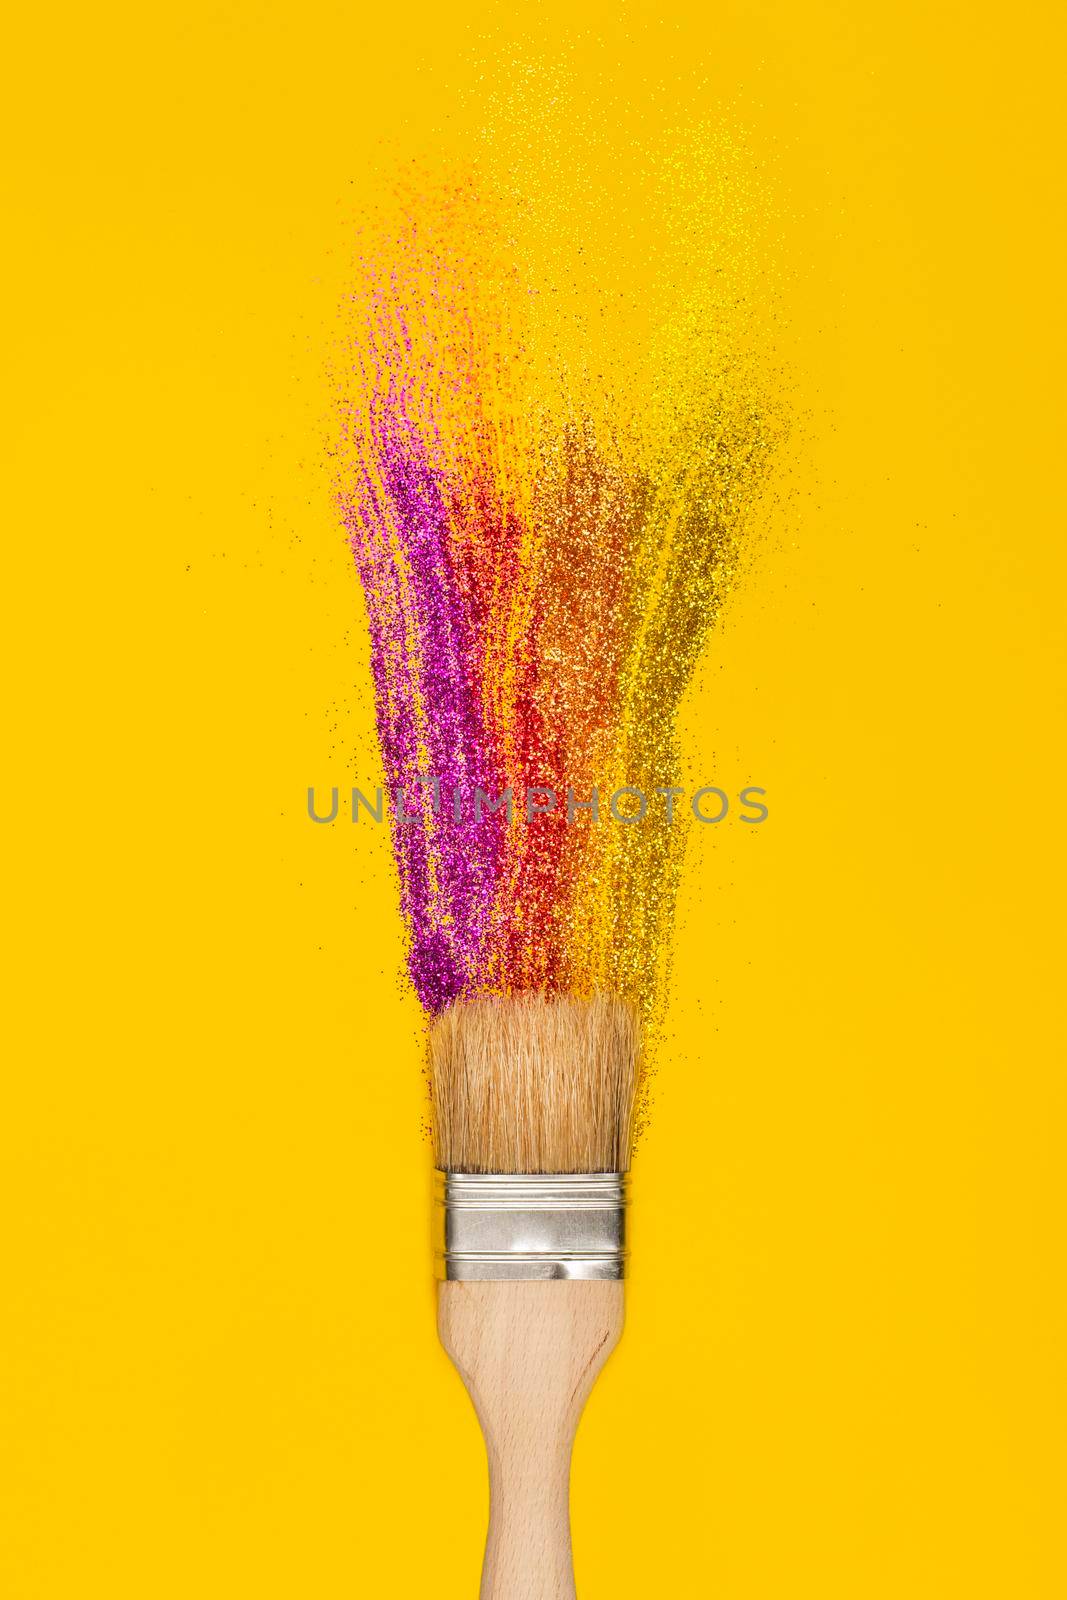 Pain brush and stroke or smear made of glossy sparkling glitter on bright yellow background. Vertical banner. Creative art concept